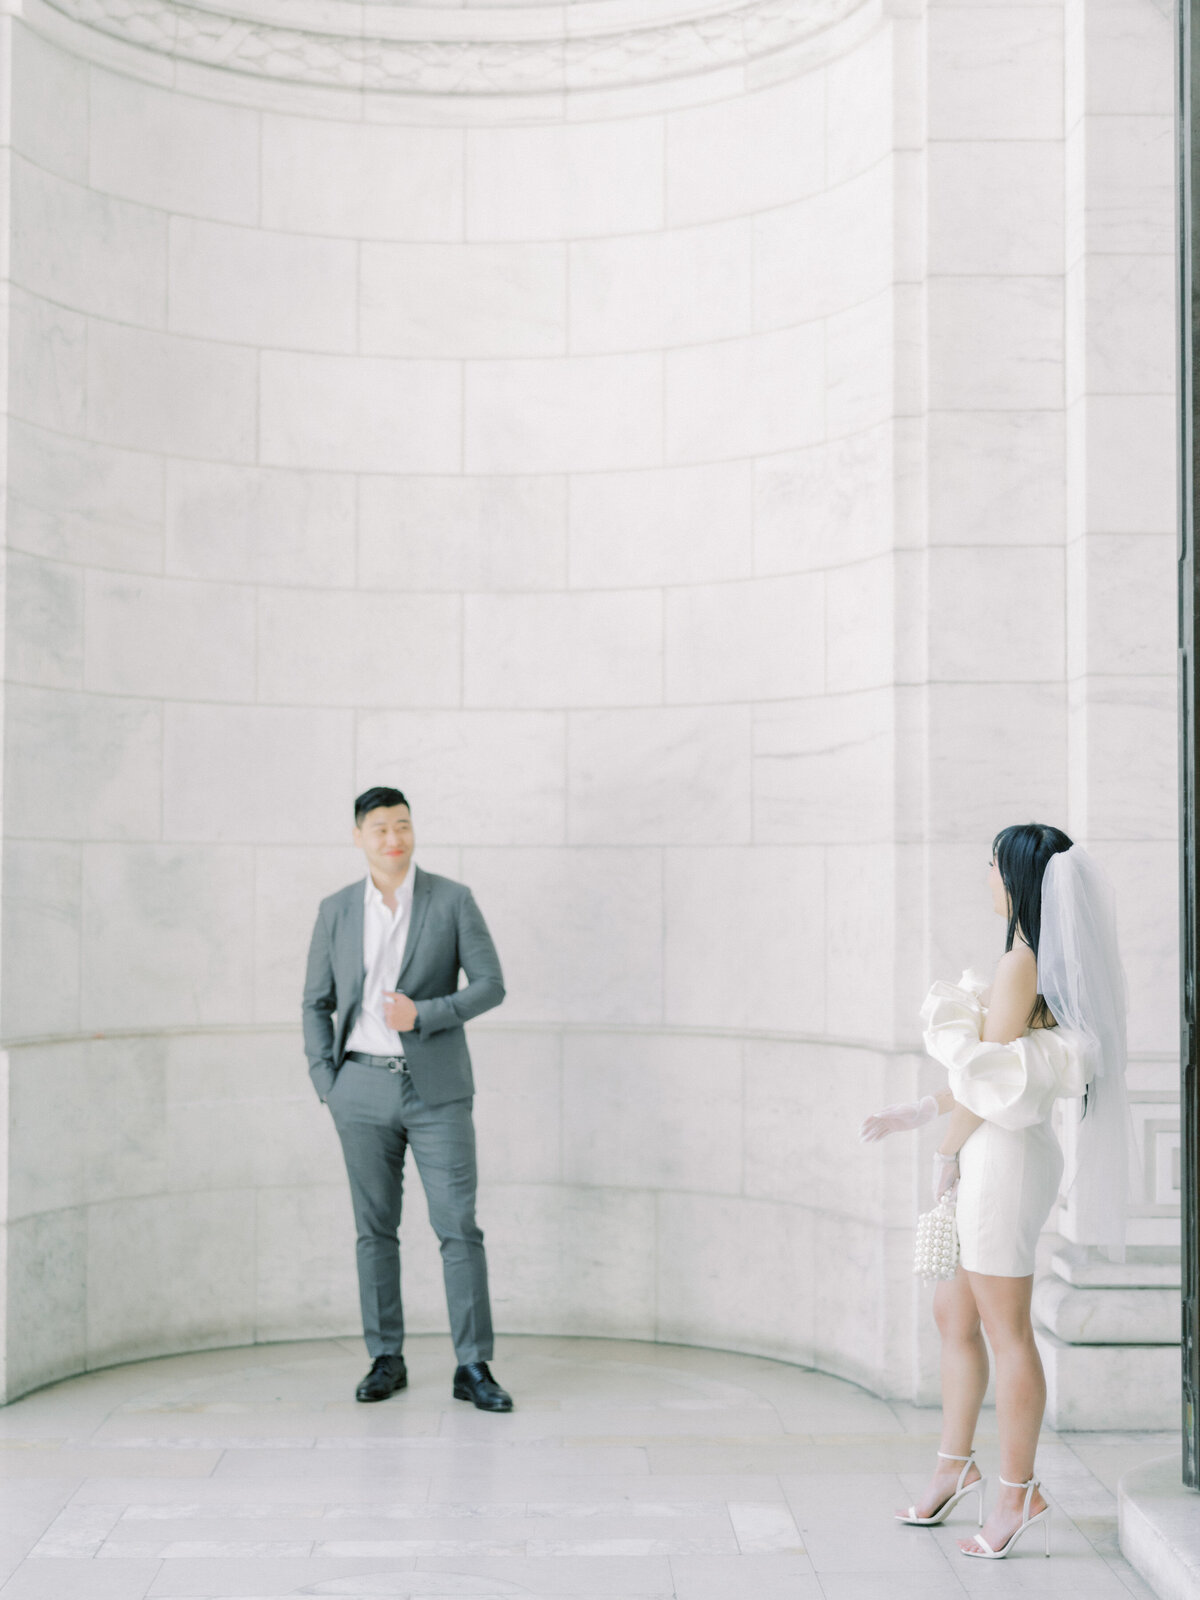 Vogue Editiorial NYC Elopement Themed Engagement Session Highlights | Amarachi Ikeji Photography 30